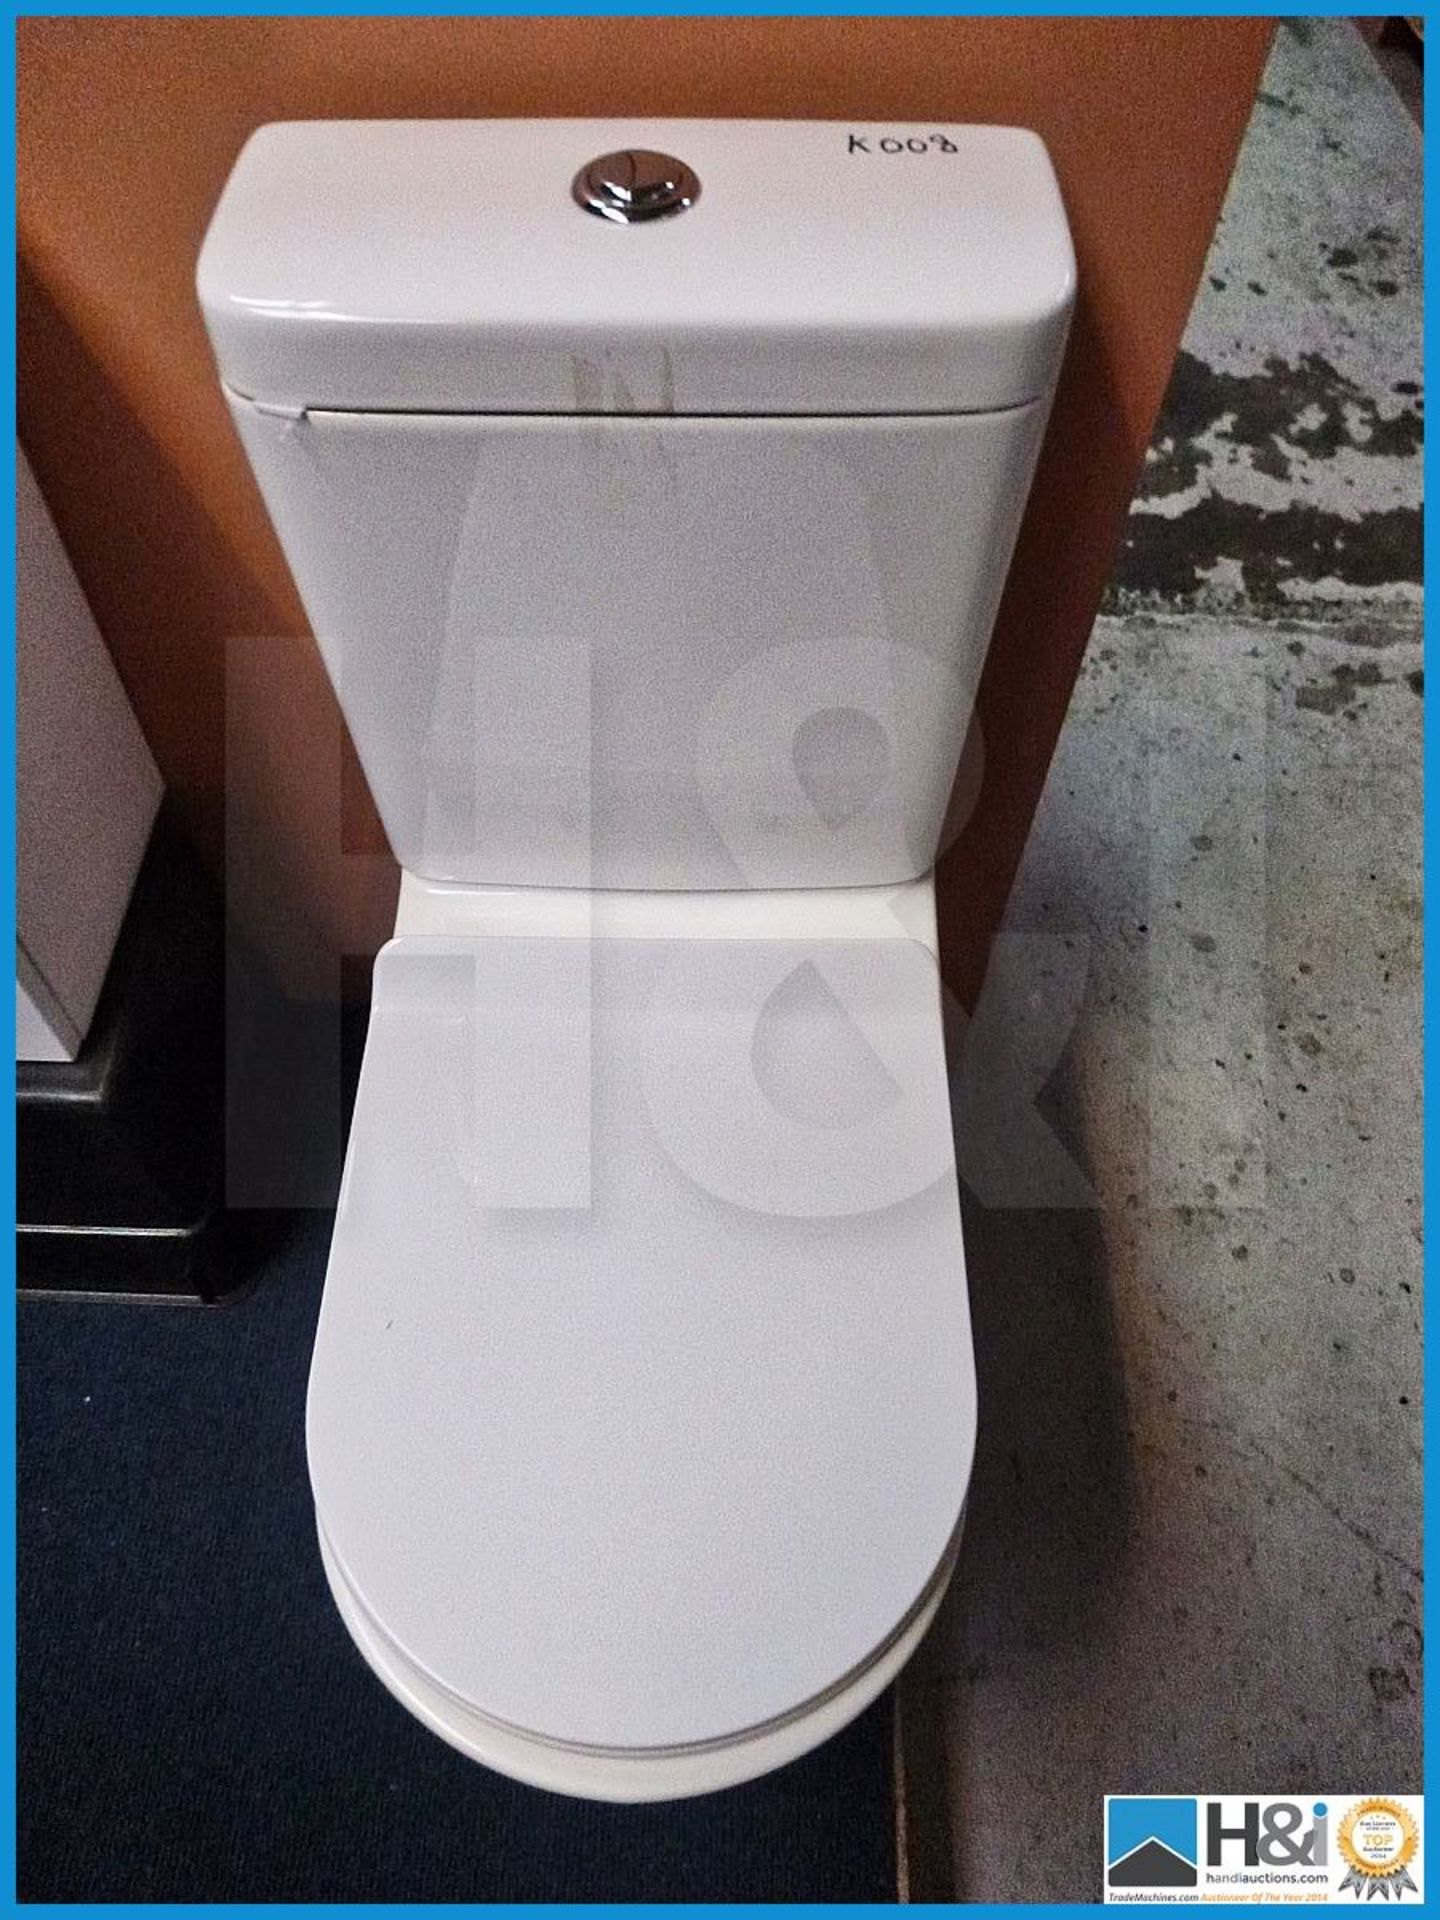 Luxury K 008 Full facia vitreous china close coupled toilet. Complete with clean easy soft close sea